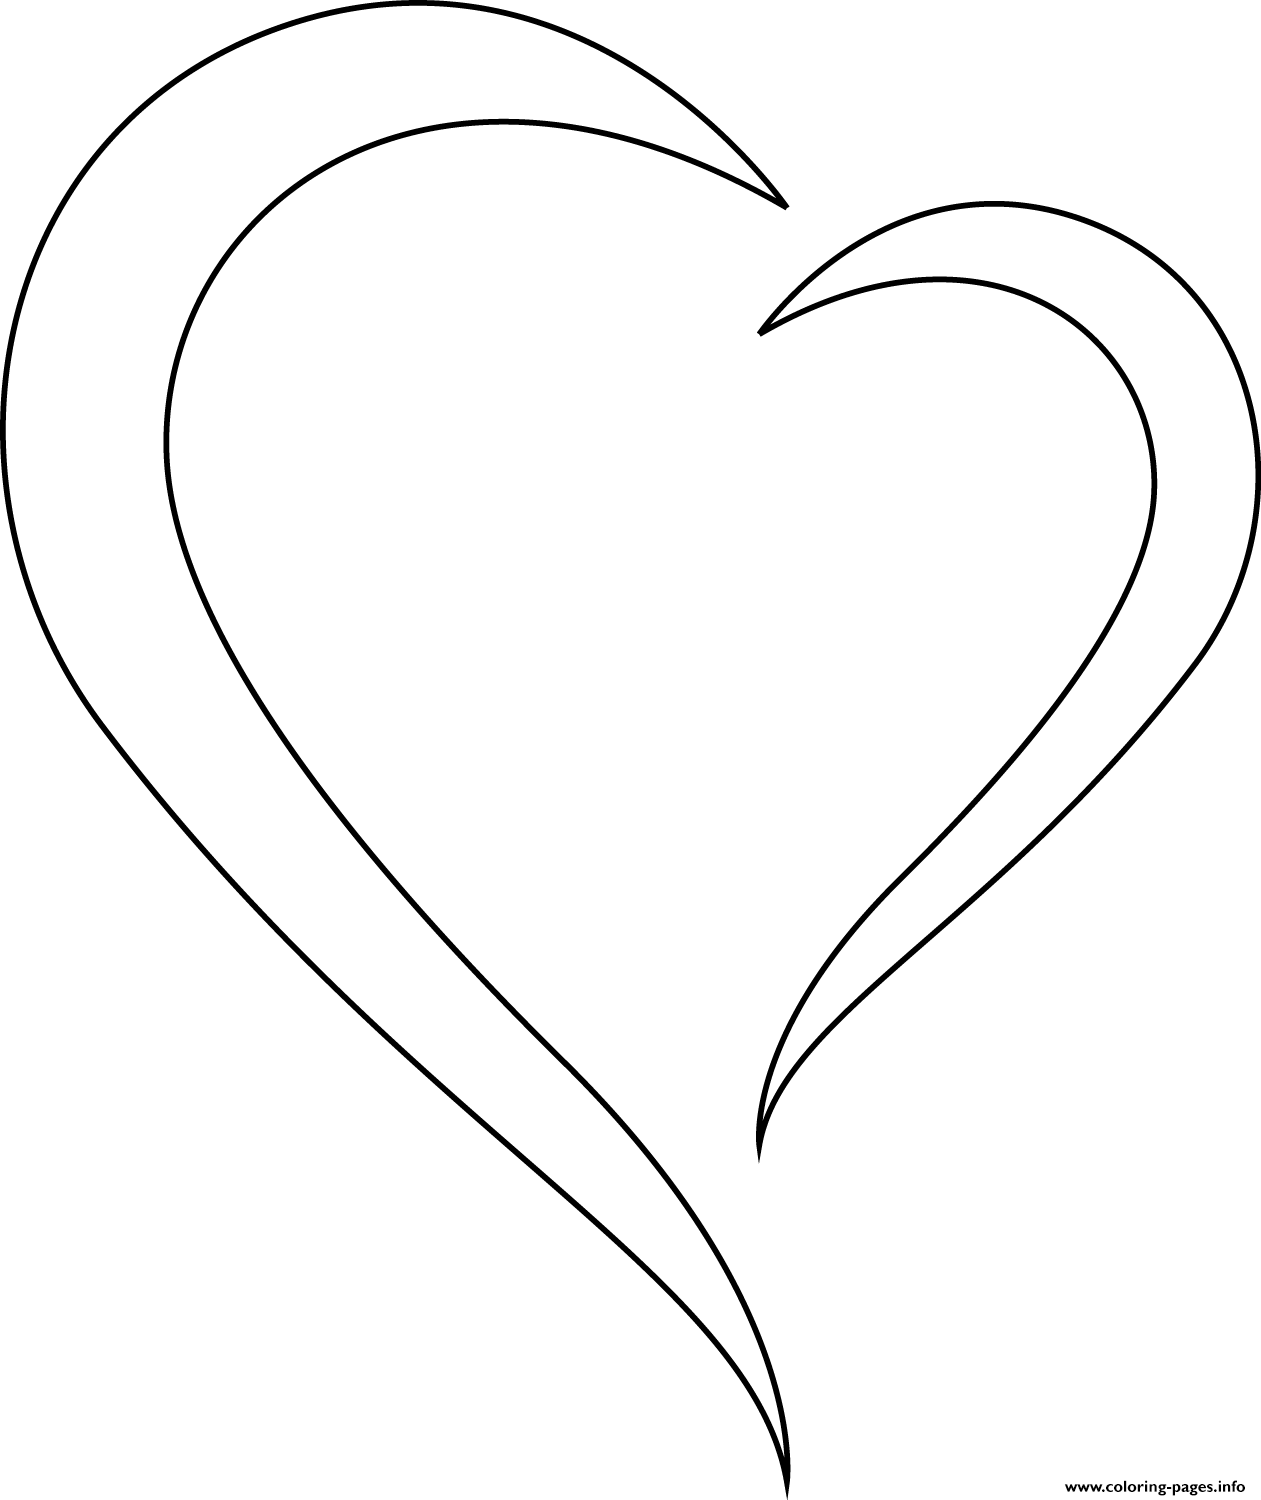 Stylized Heart coloring